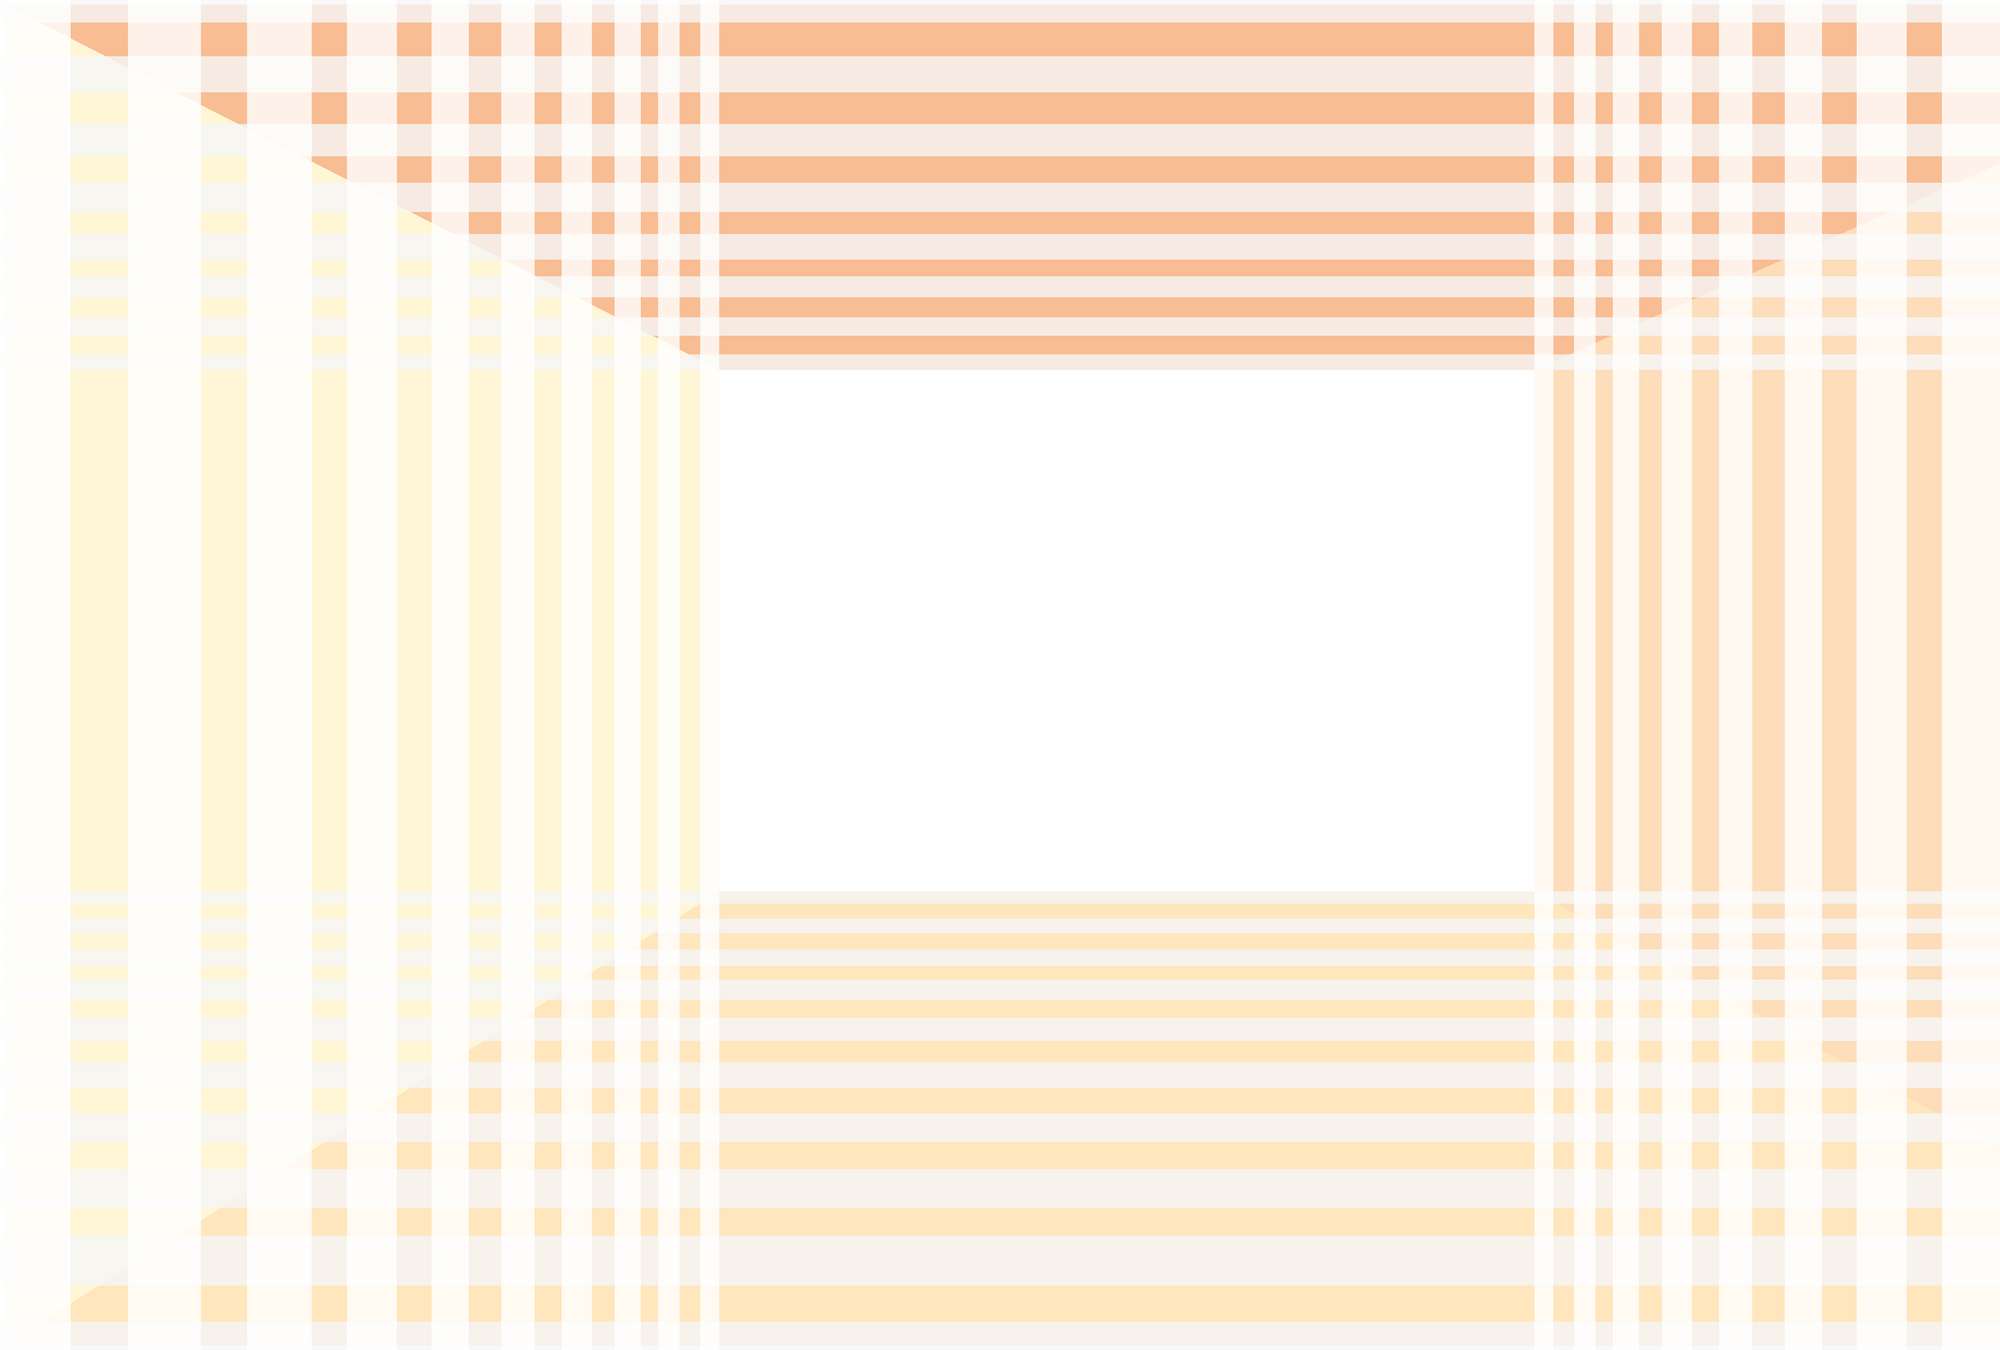             Modern mural with simple stripes design - orange, white, yellow
        